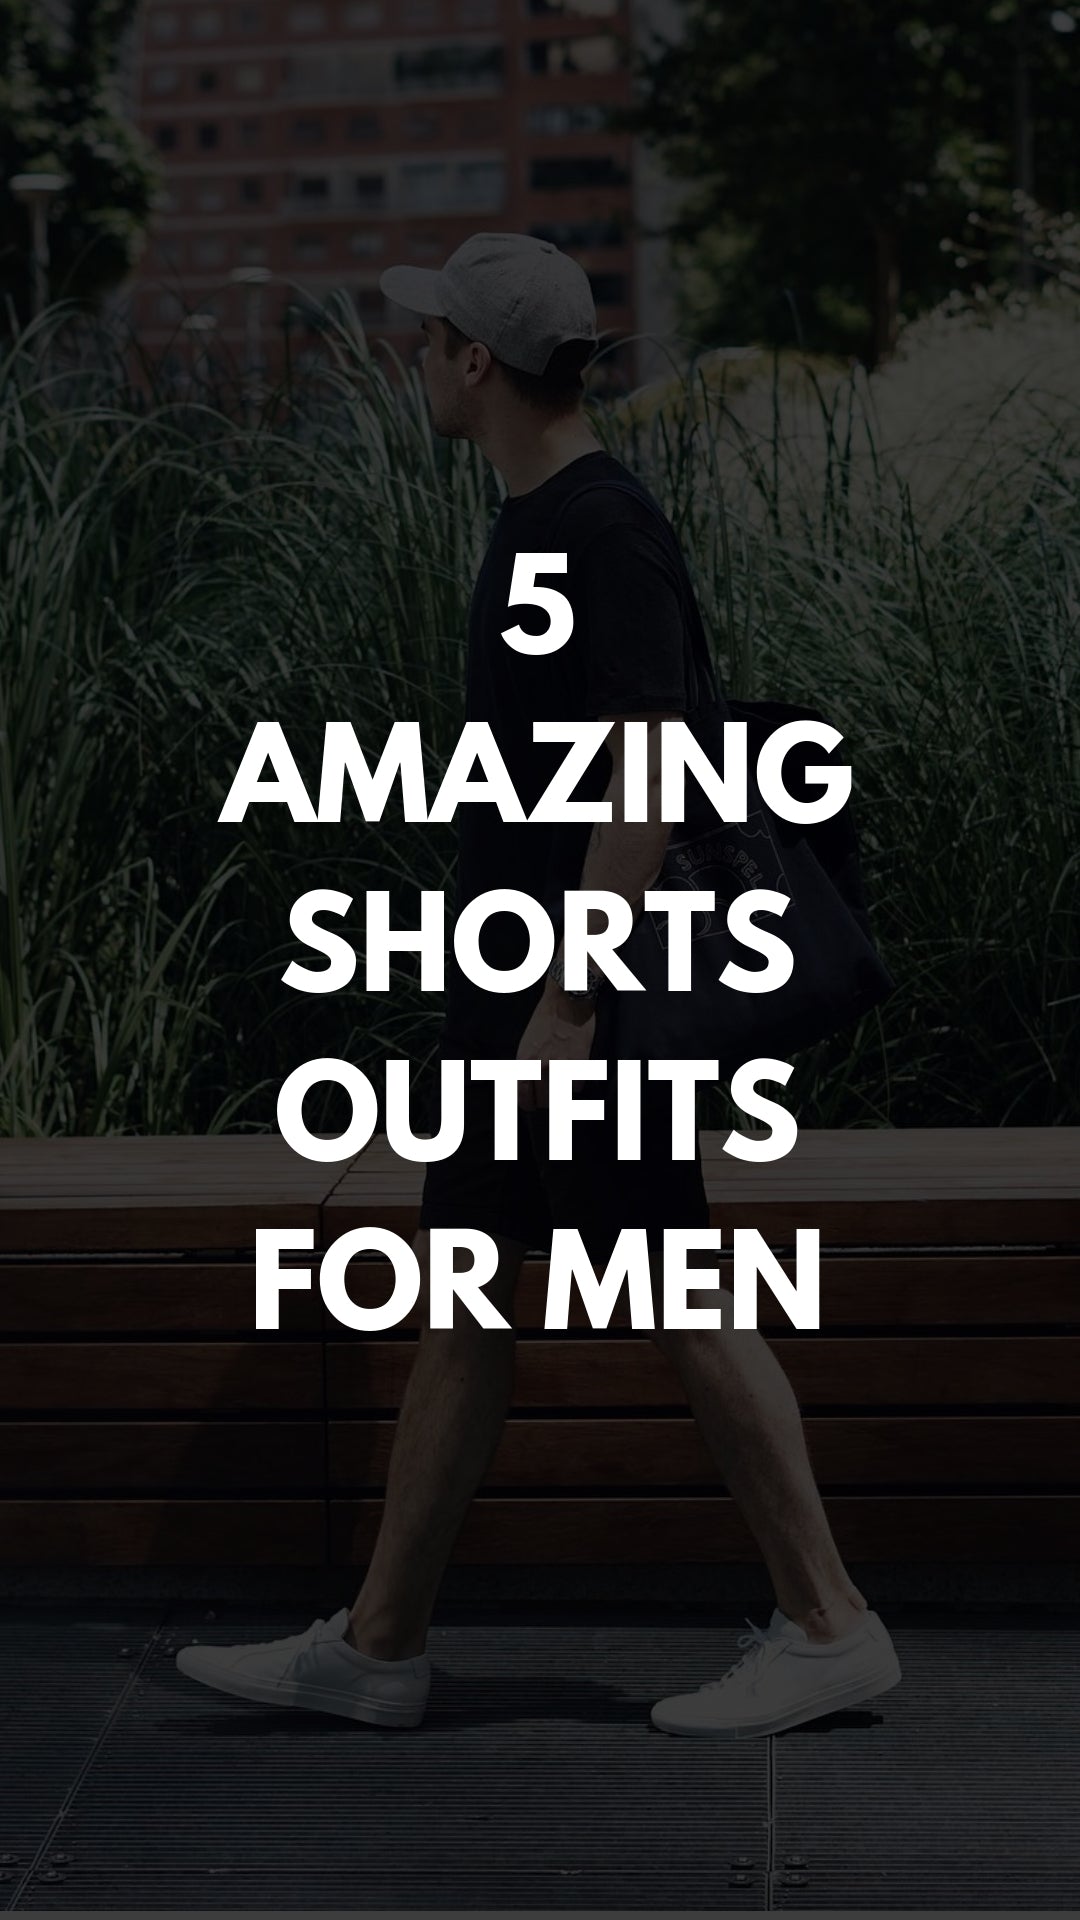 This Is How You Should Wear Shorts This Summer #summer #streetstyle #casualstyle #mensfashion